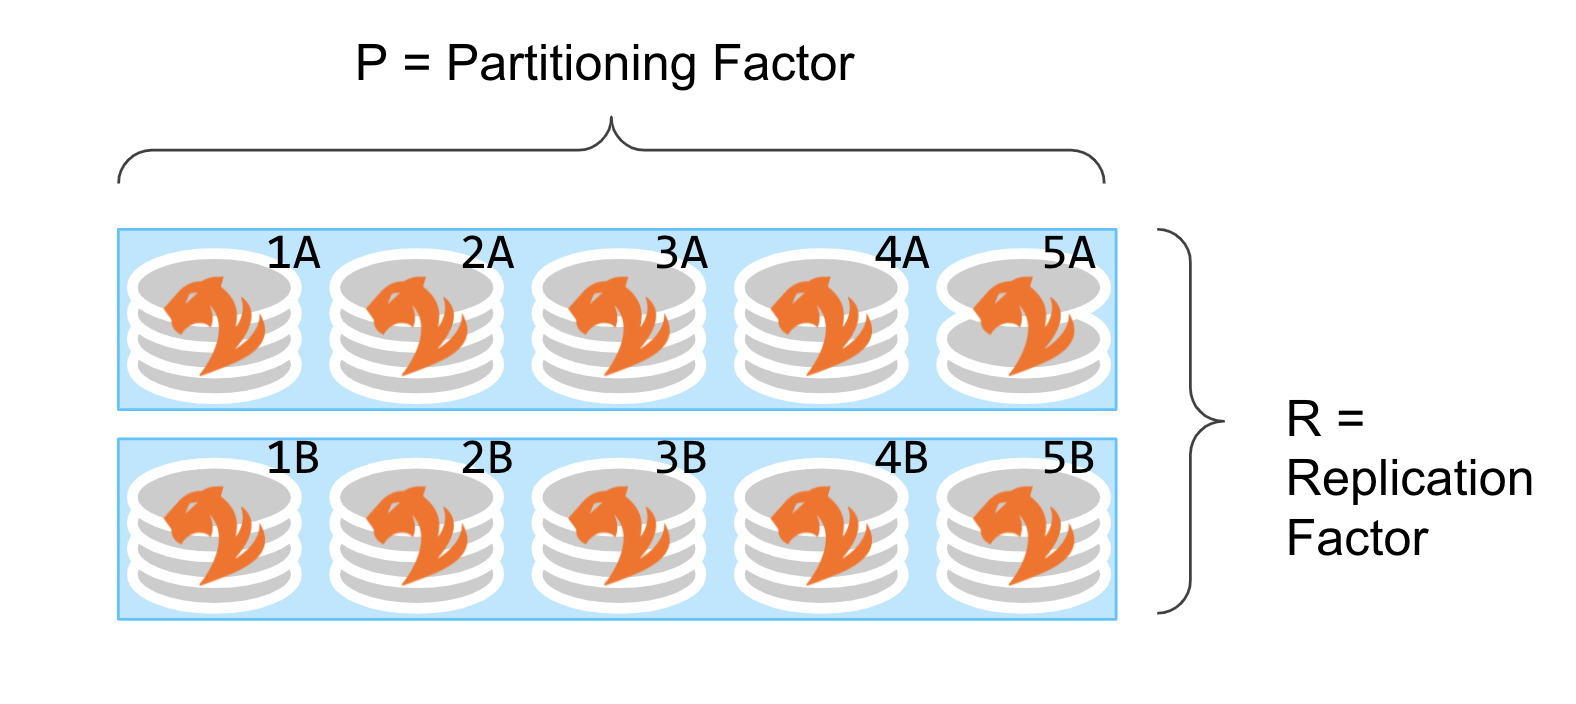 Diagram showing a cluster with 10 partitions. The top group of partitions are labeled 1A through 5A, and the replicas are labeled 1B through 5B.